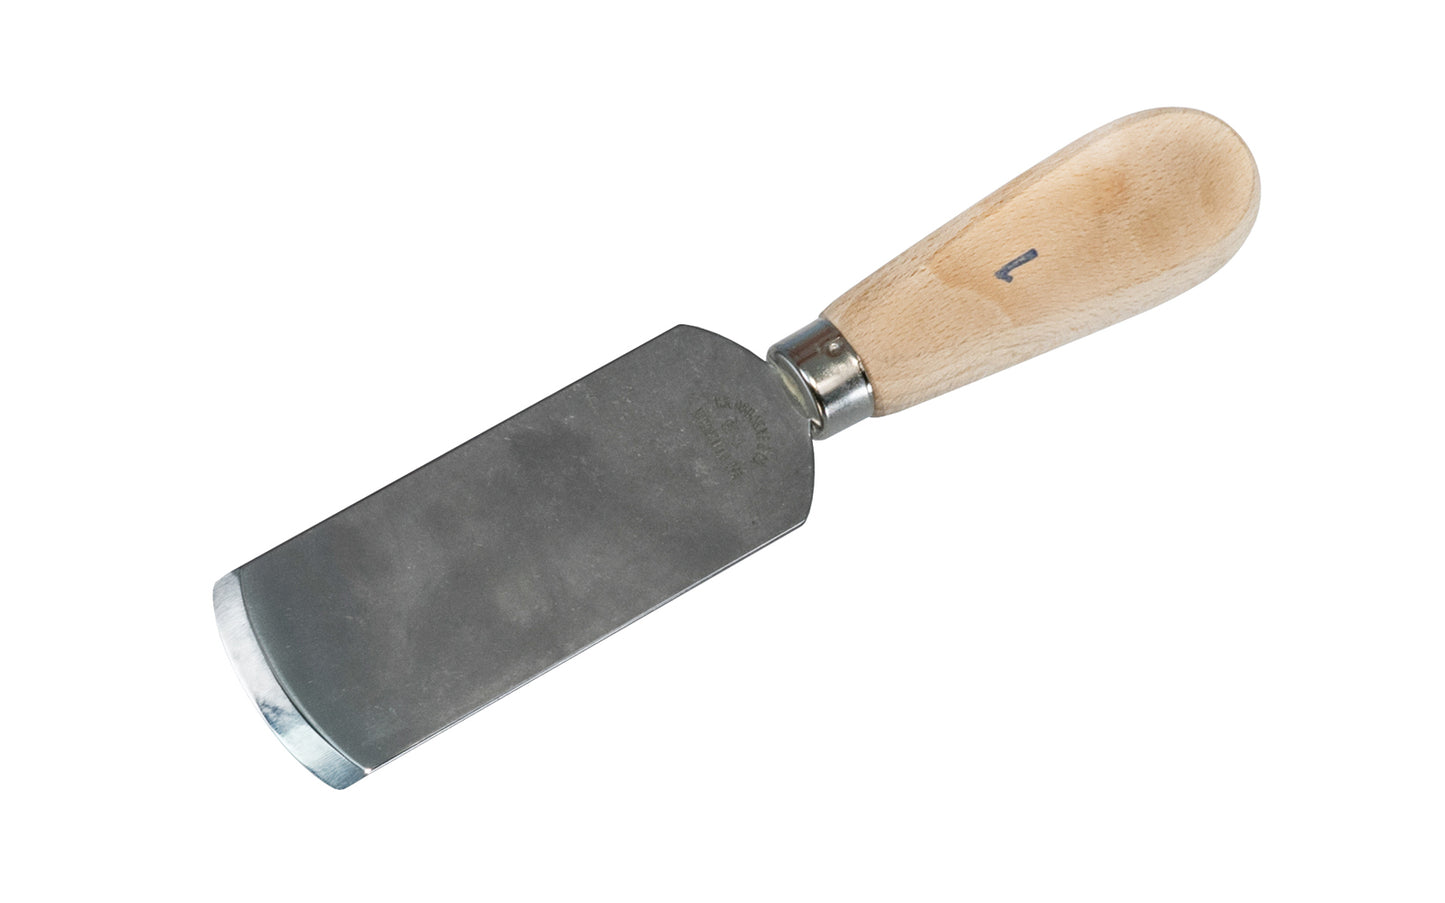 Made in USA · C.S. Osborne Model No. 67-1 - A quality USA-made curved bevel skiving knife made by CS Osborne. Made of high carbon steel with a nickel plated ferrule & hardwood handle. Round Beveled Edge Skiving Knife. 1-9/16" blade width - 7-5/8" overall length - CS Osborne Leather working knife - Leather Knife - 096685660030